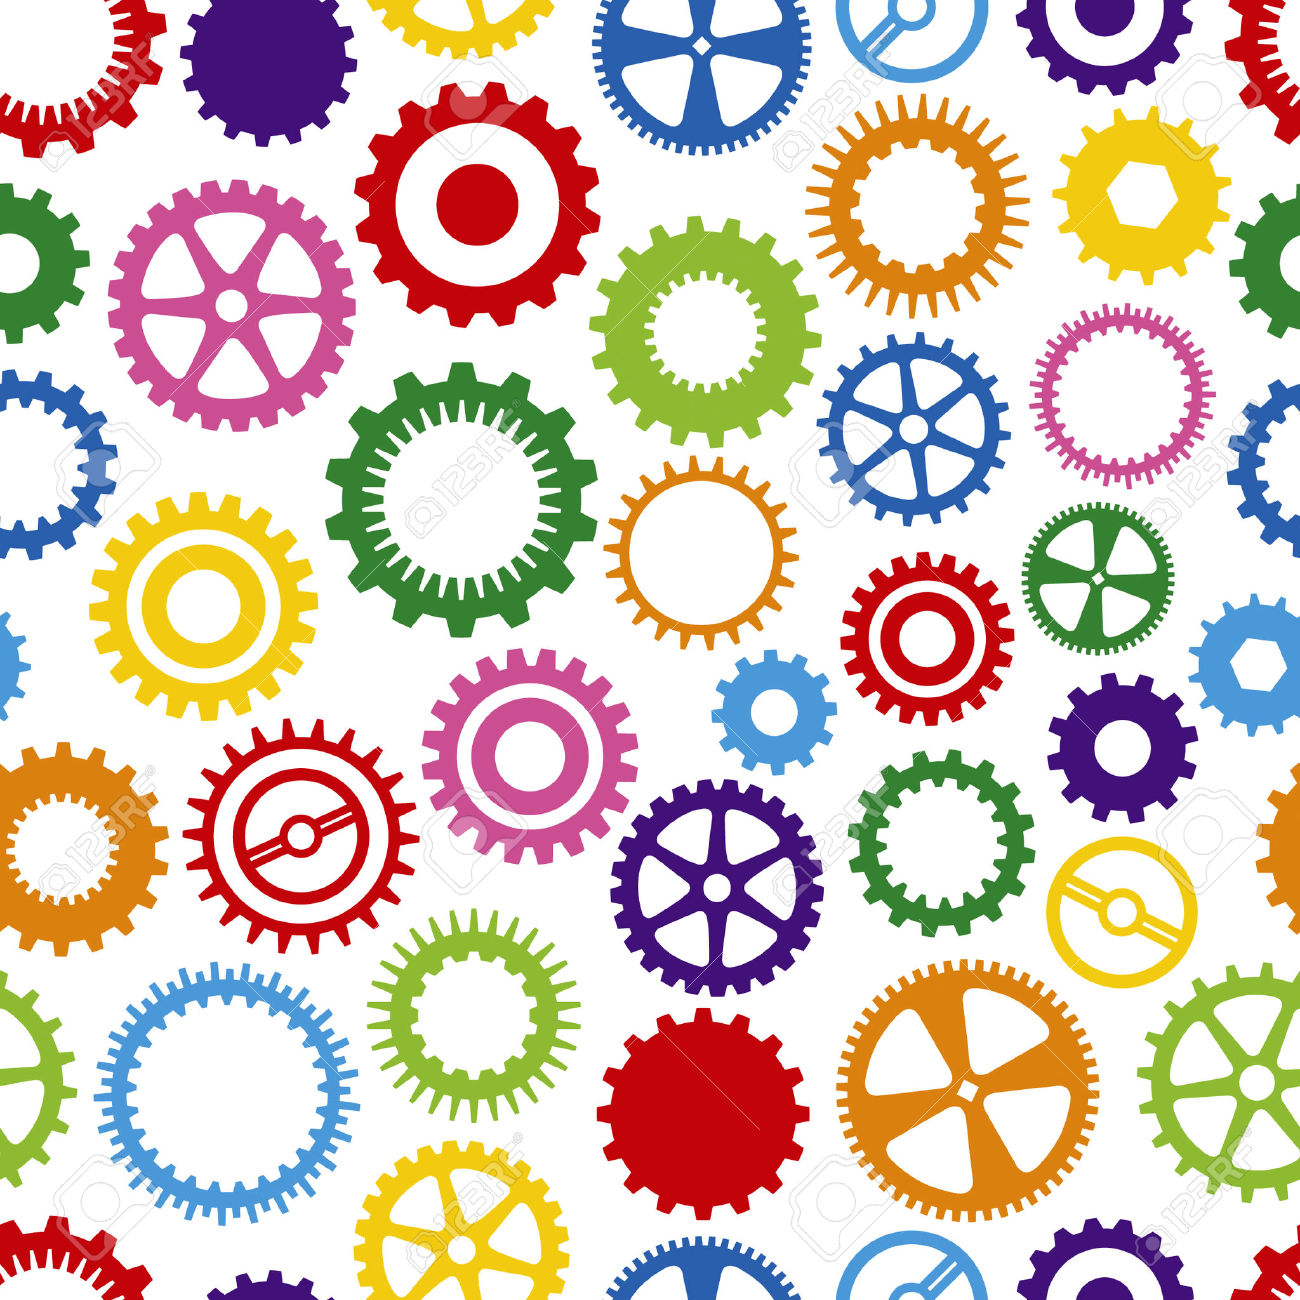 Colorful gear clipart